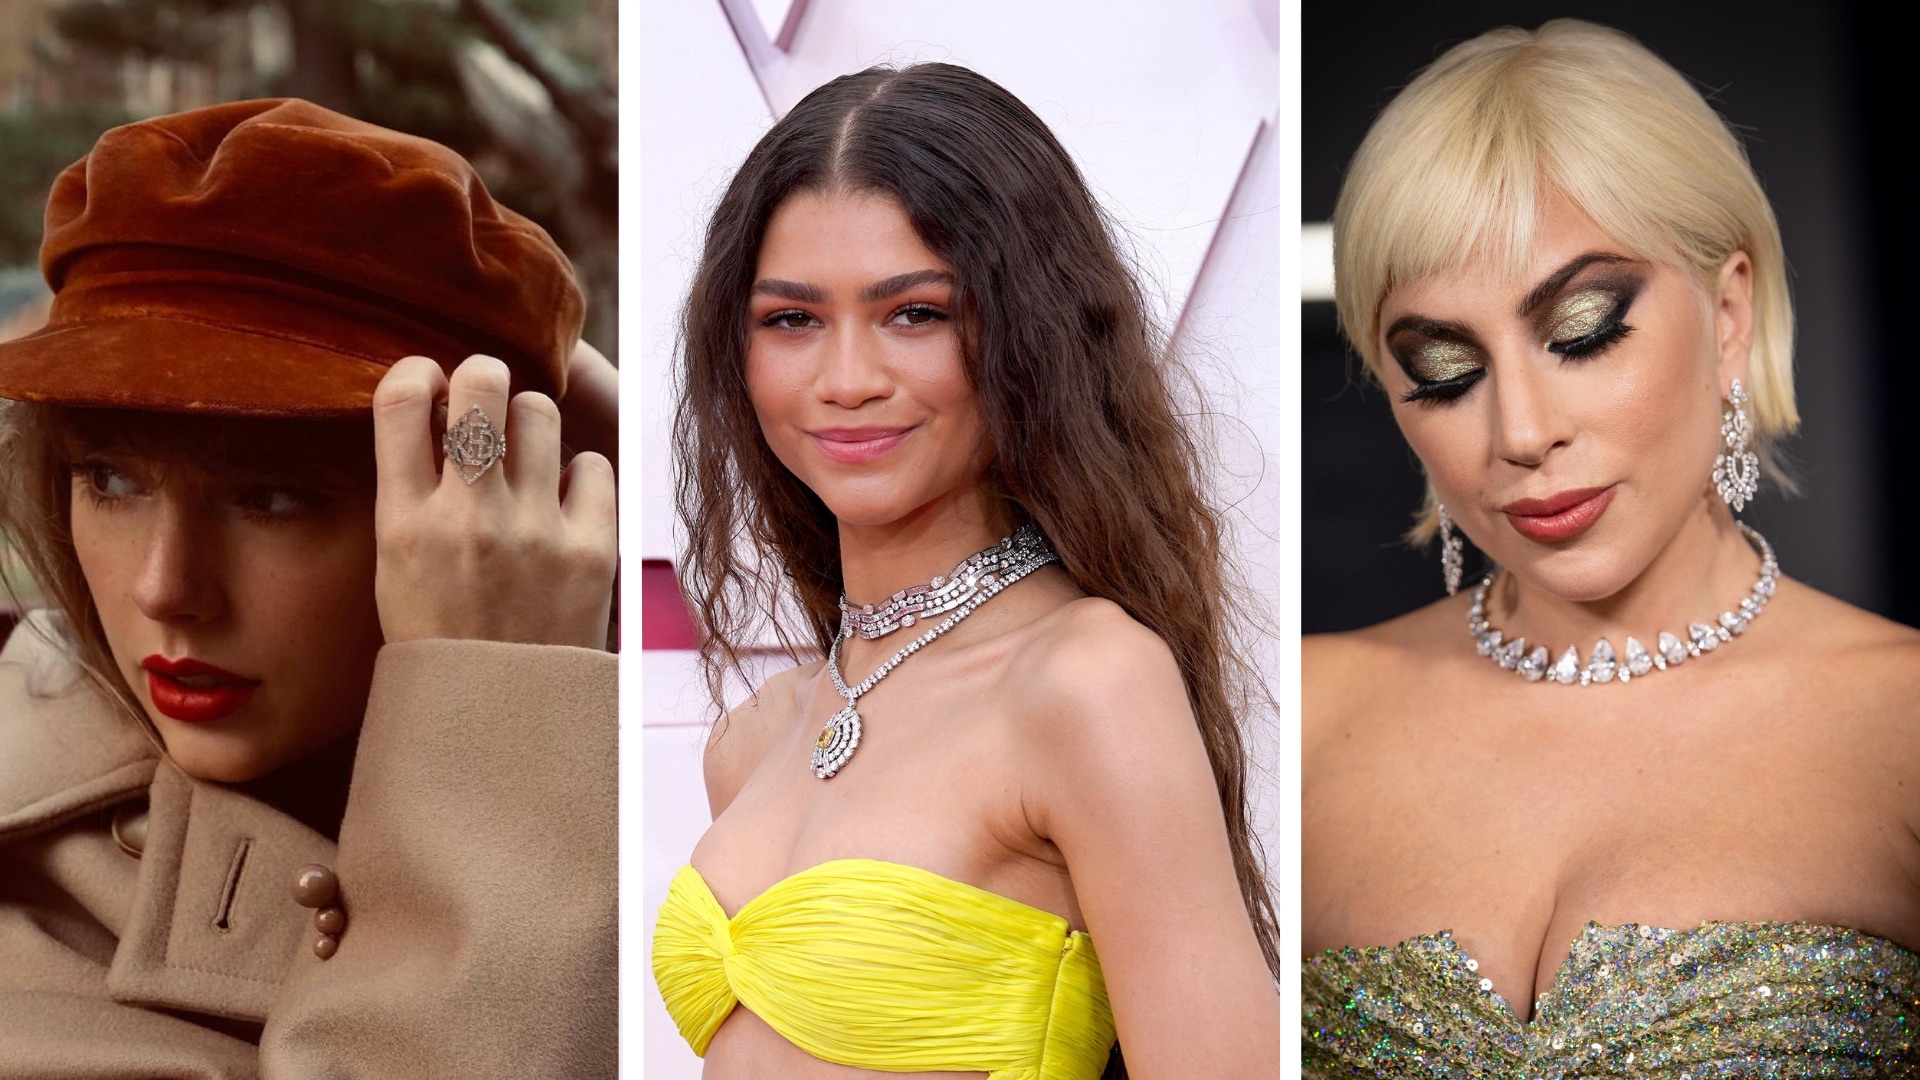 The 8 Best Celebrity Diamond Jewelry Moments of 2021 - Only Natural Diamonds